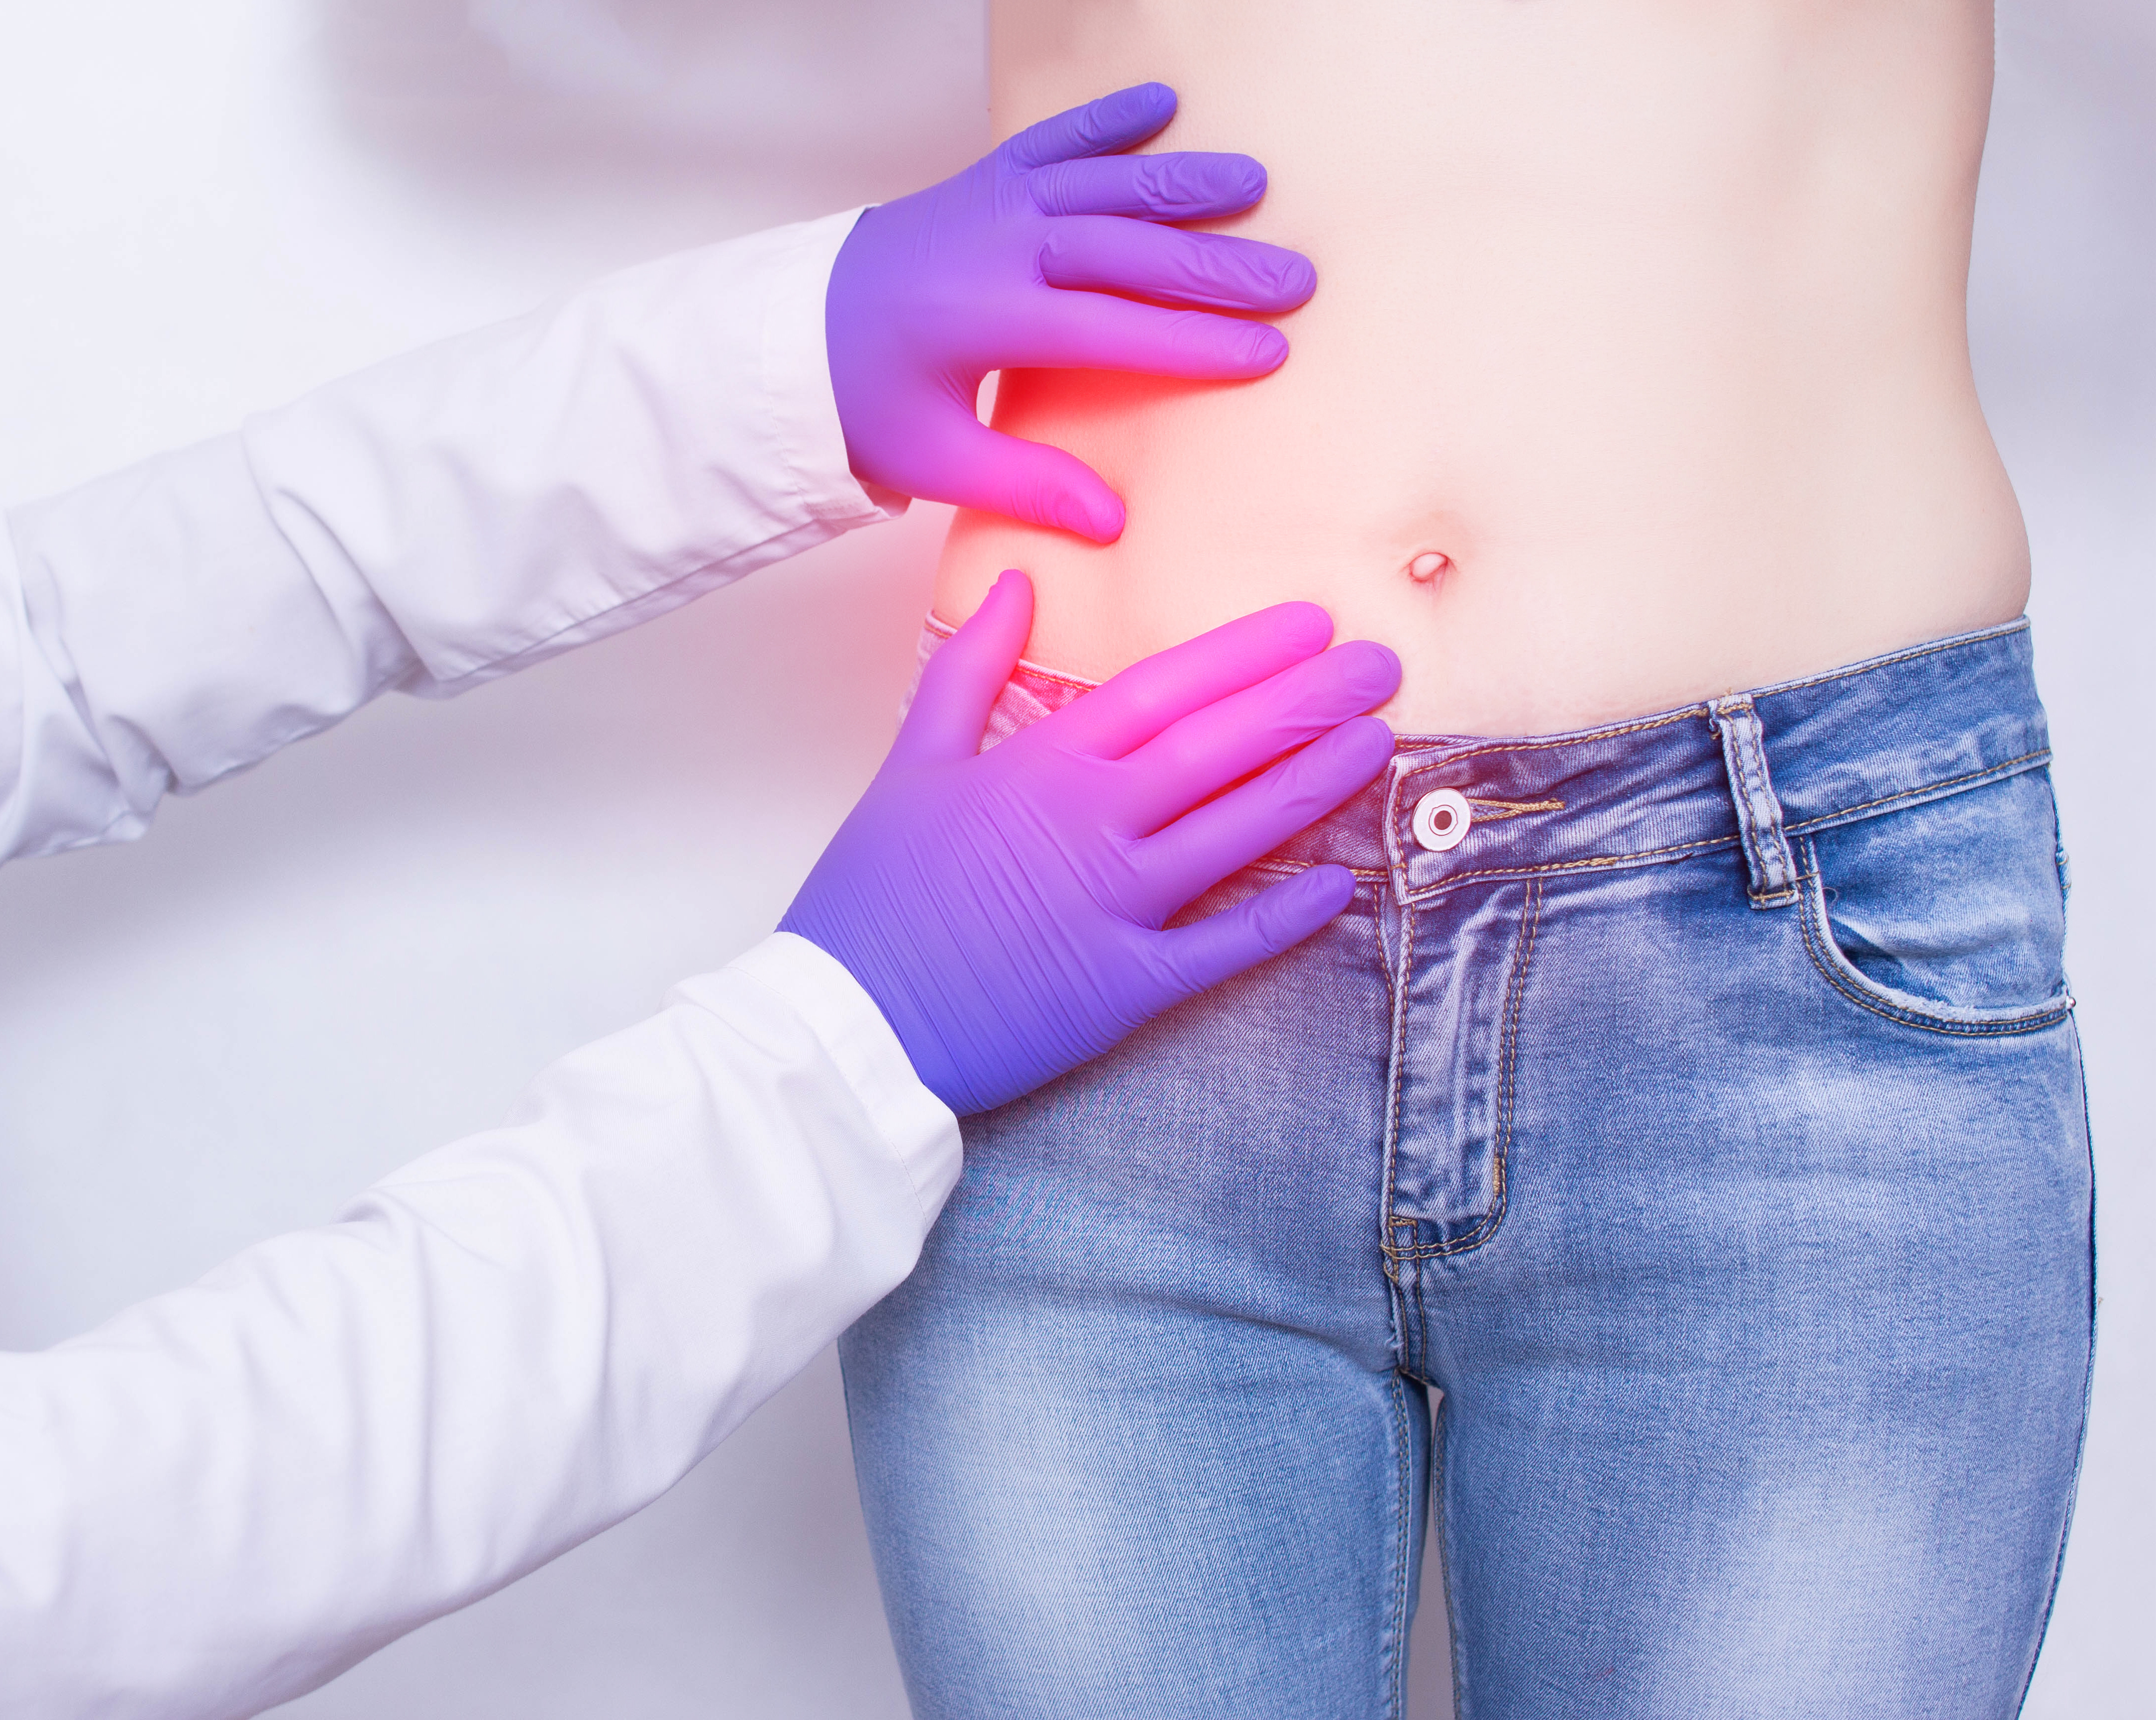 Warning Signs You May Need Your Appendix Removed